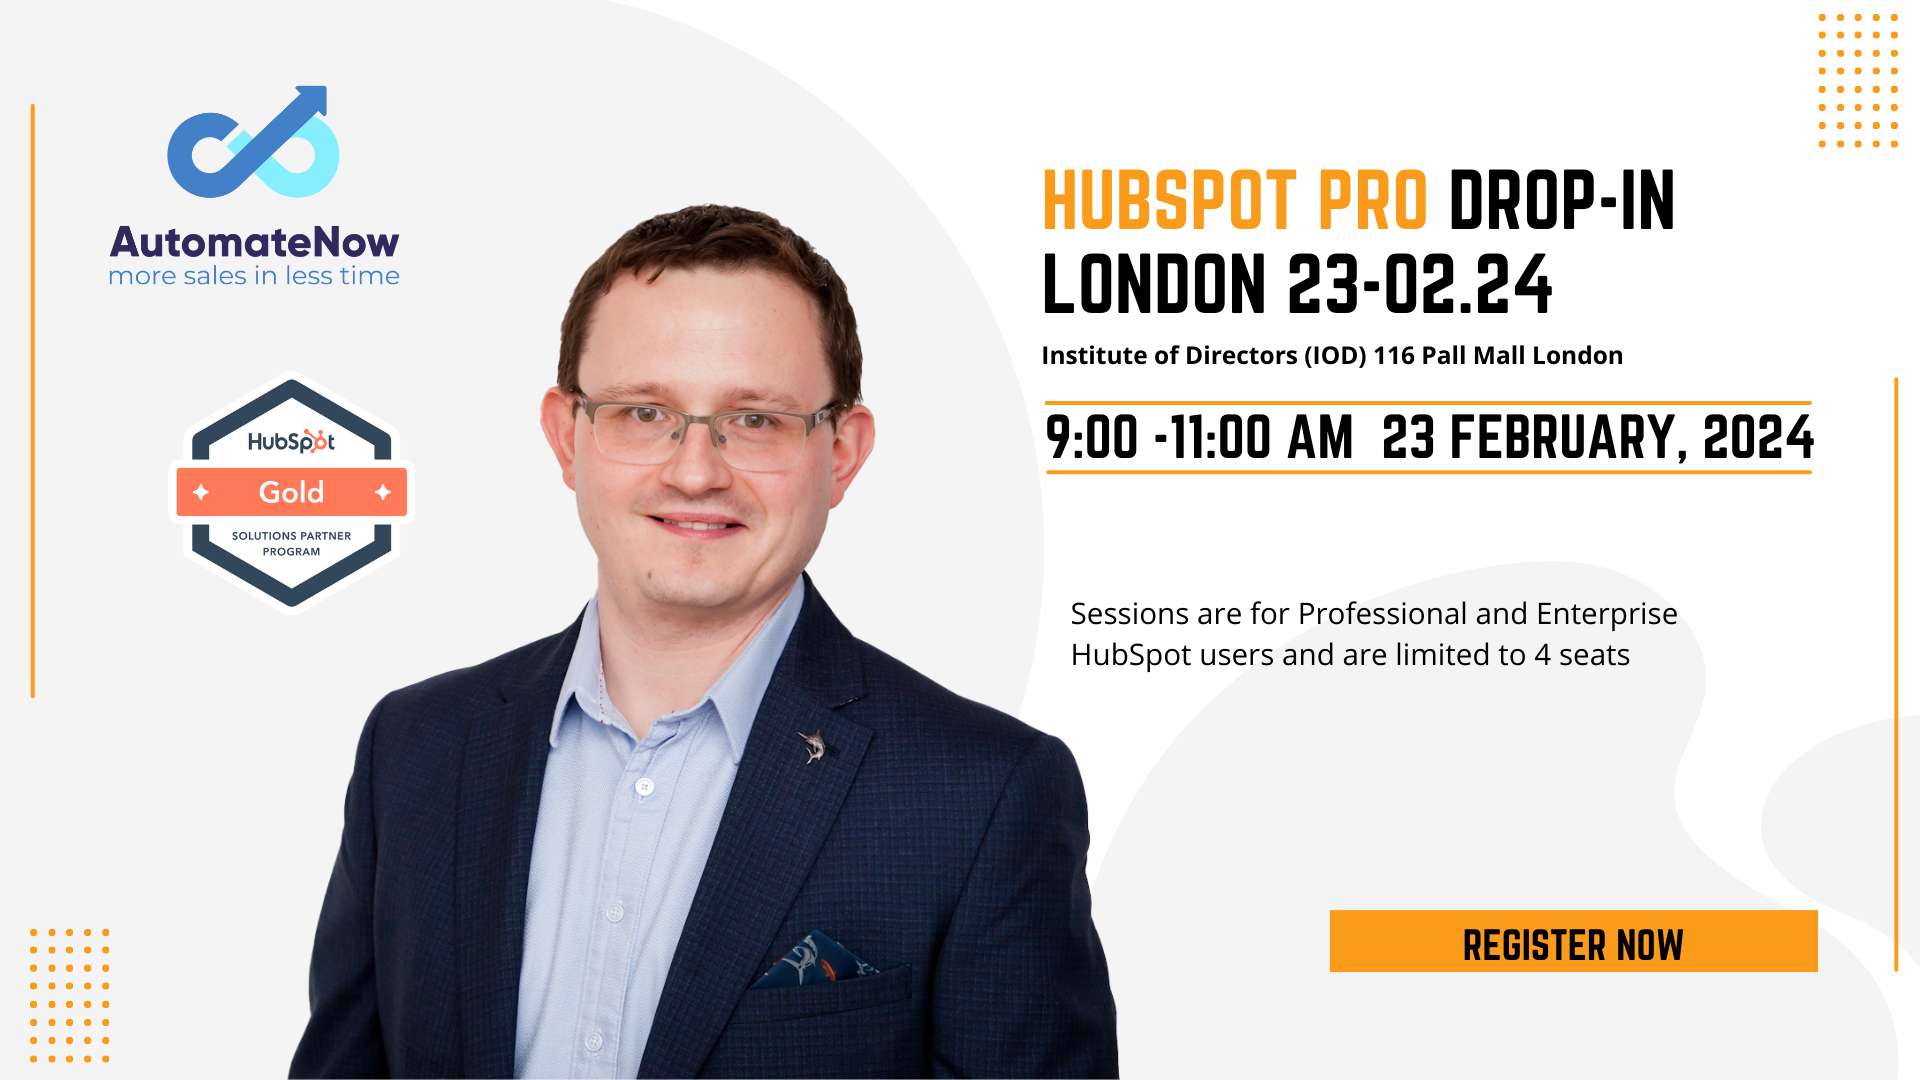 HubSpot Pro Drop-in Session London 23.02.24